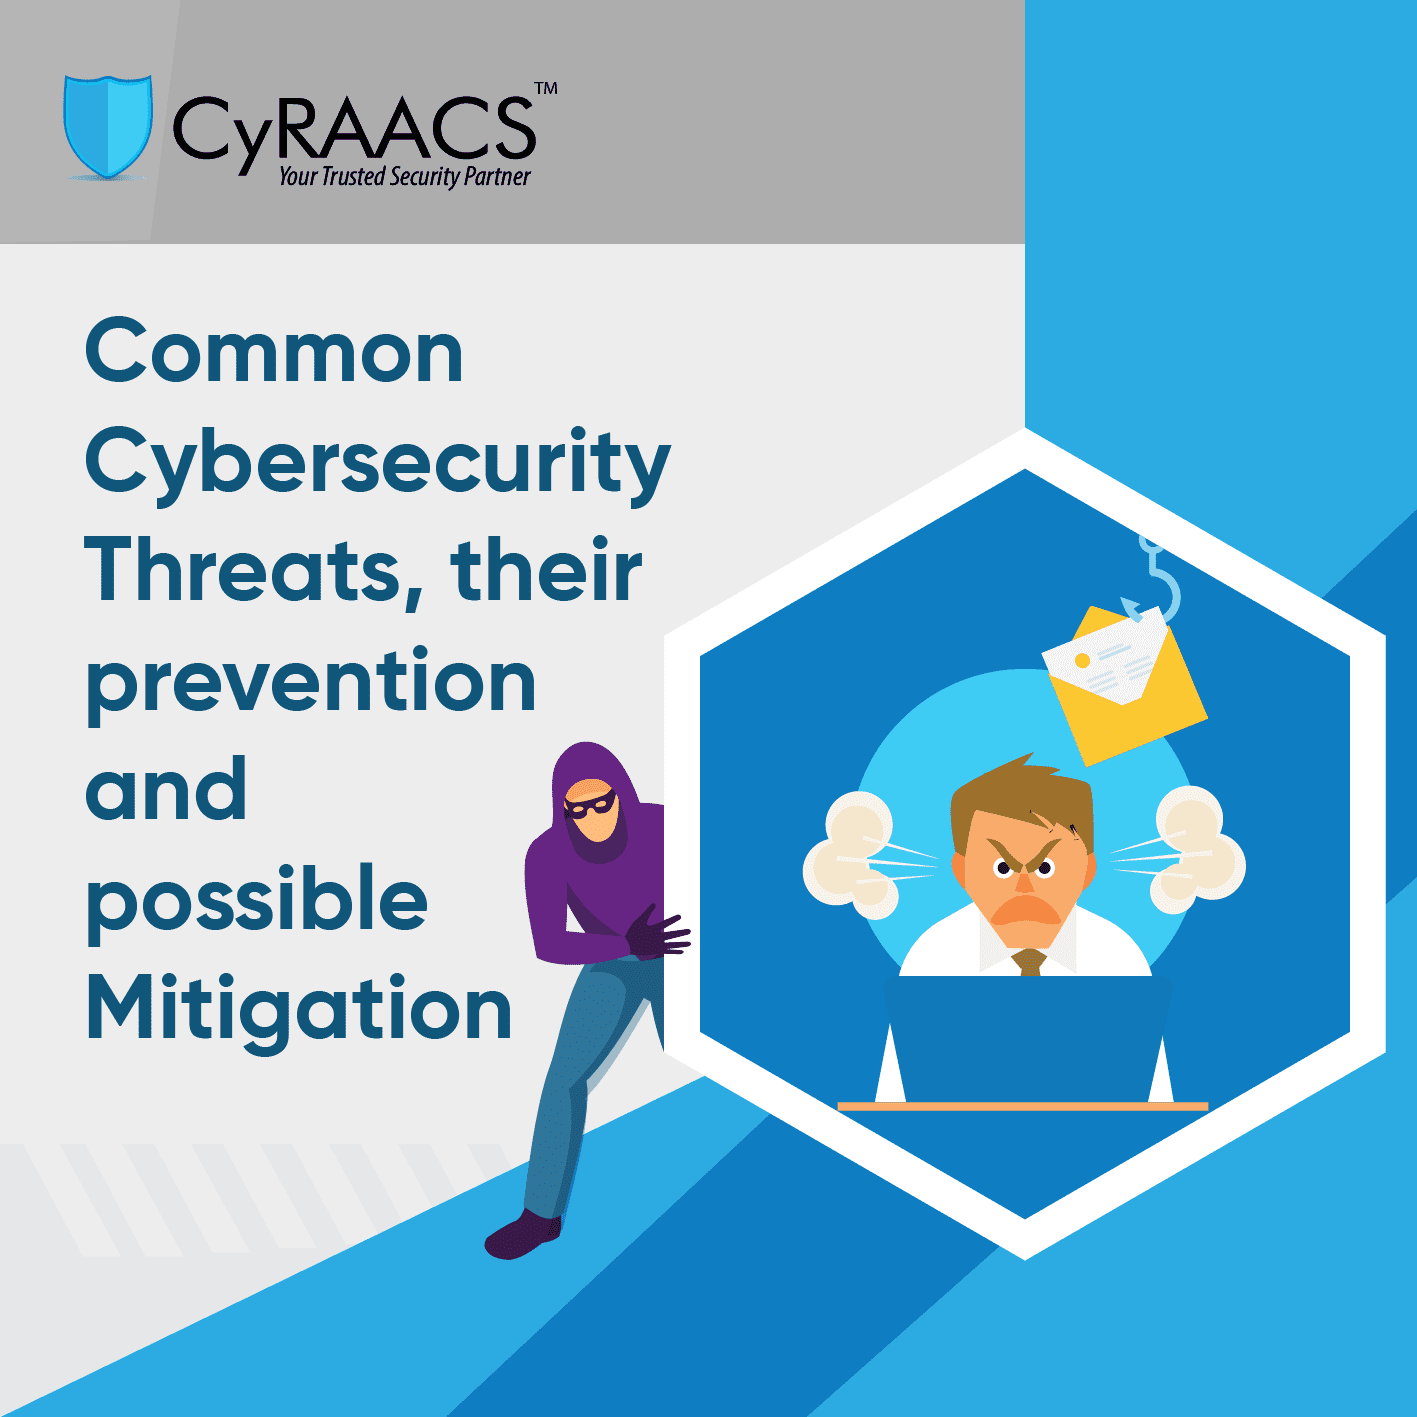 CyRAACS-Cybersecurity-Threats-Prevention-Mitigation